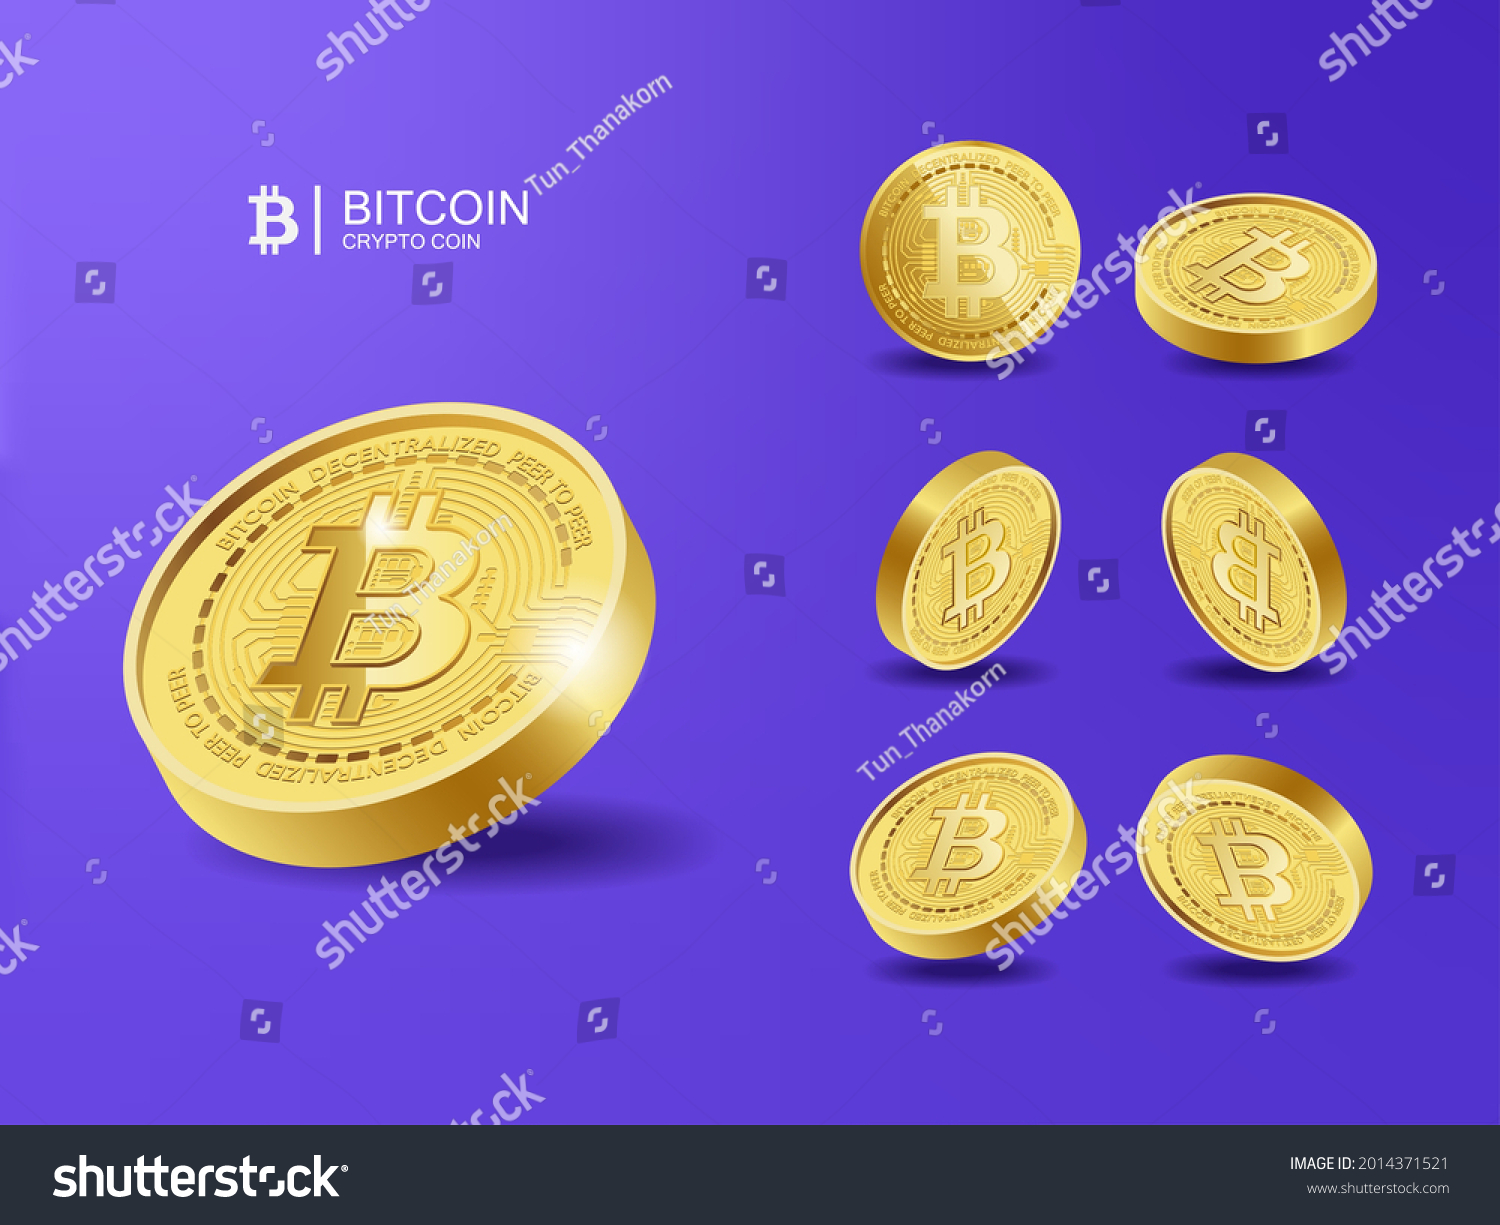 SVG of Bitcoin BTC Cryptocurrency Coins. Perspective Illustration about Crypto Coins. svg